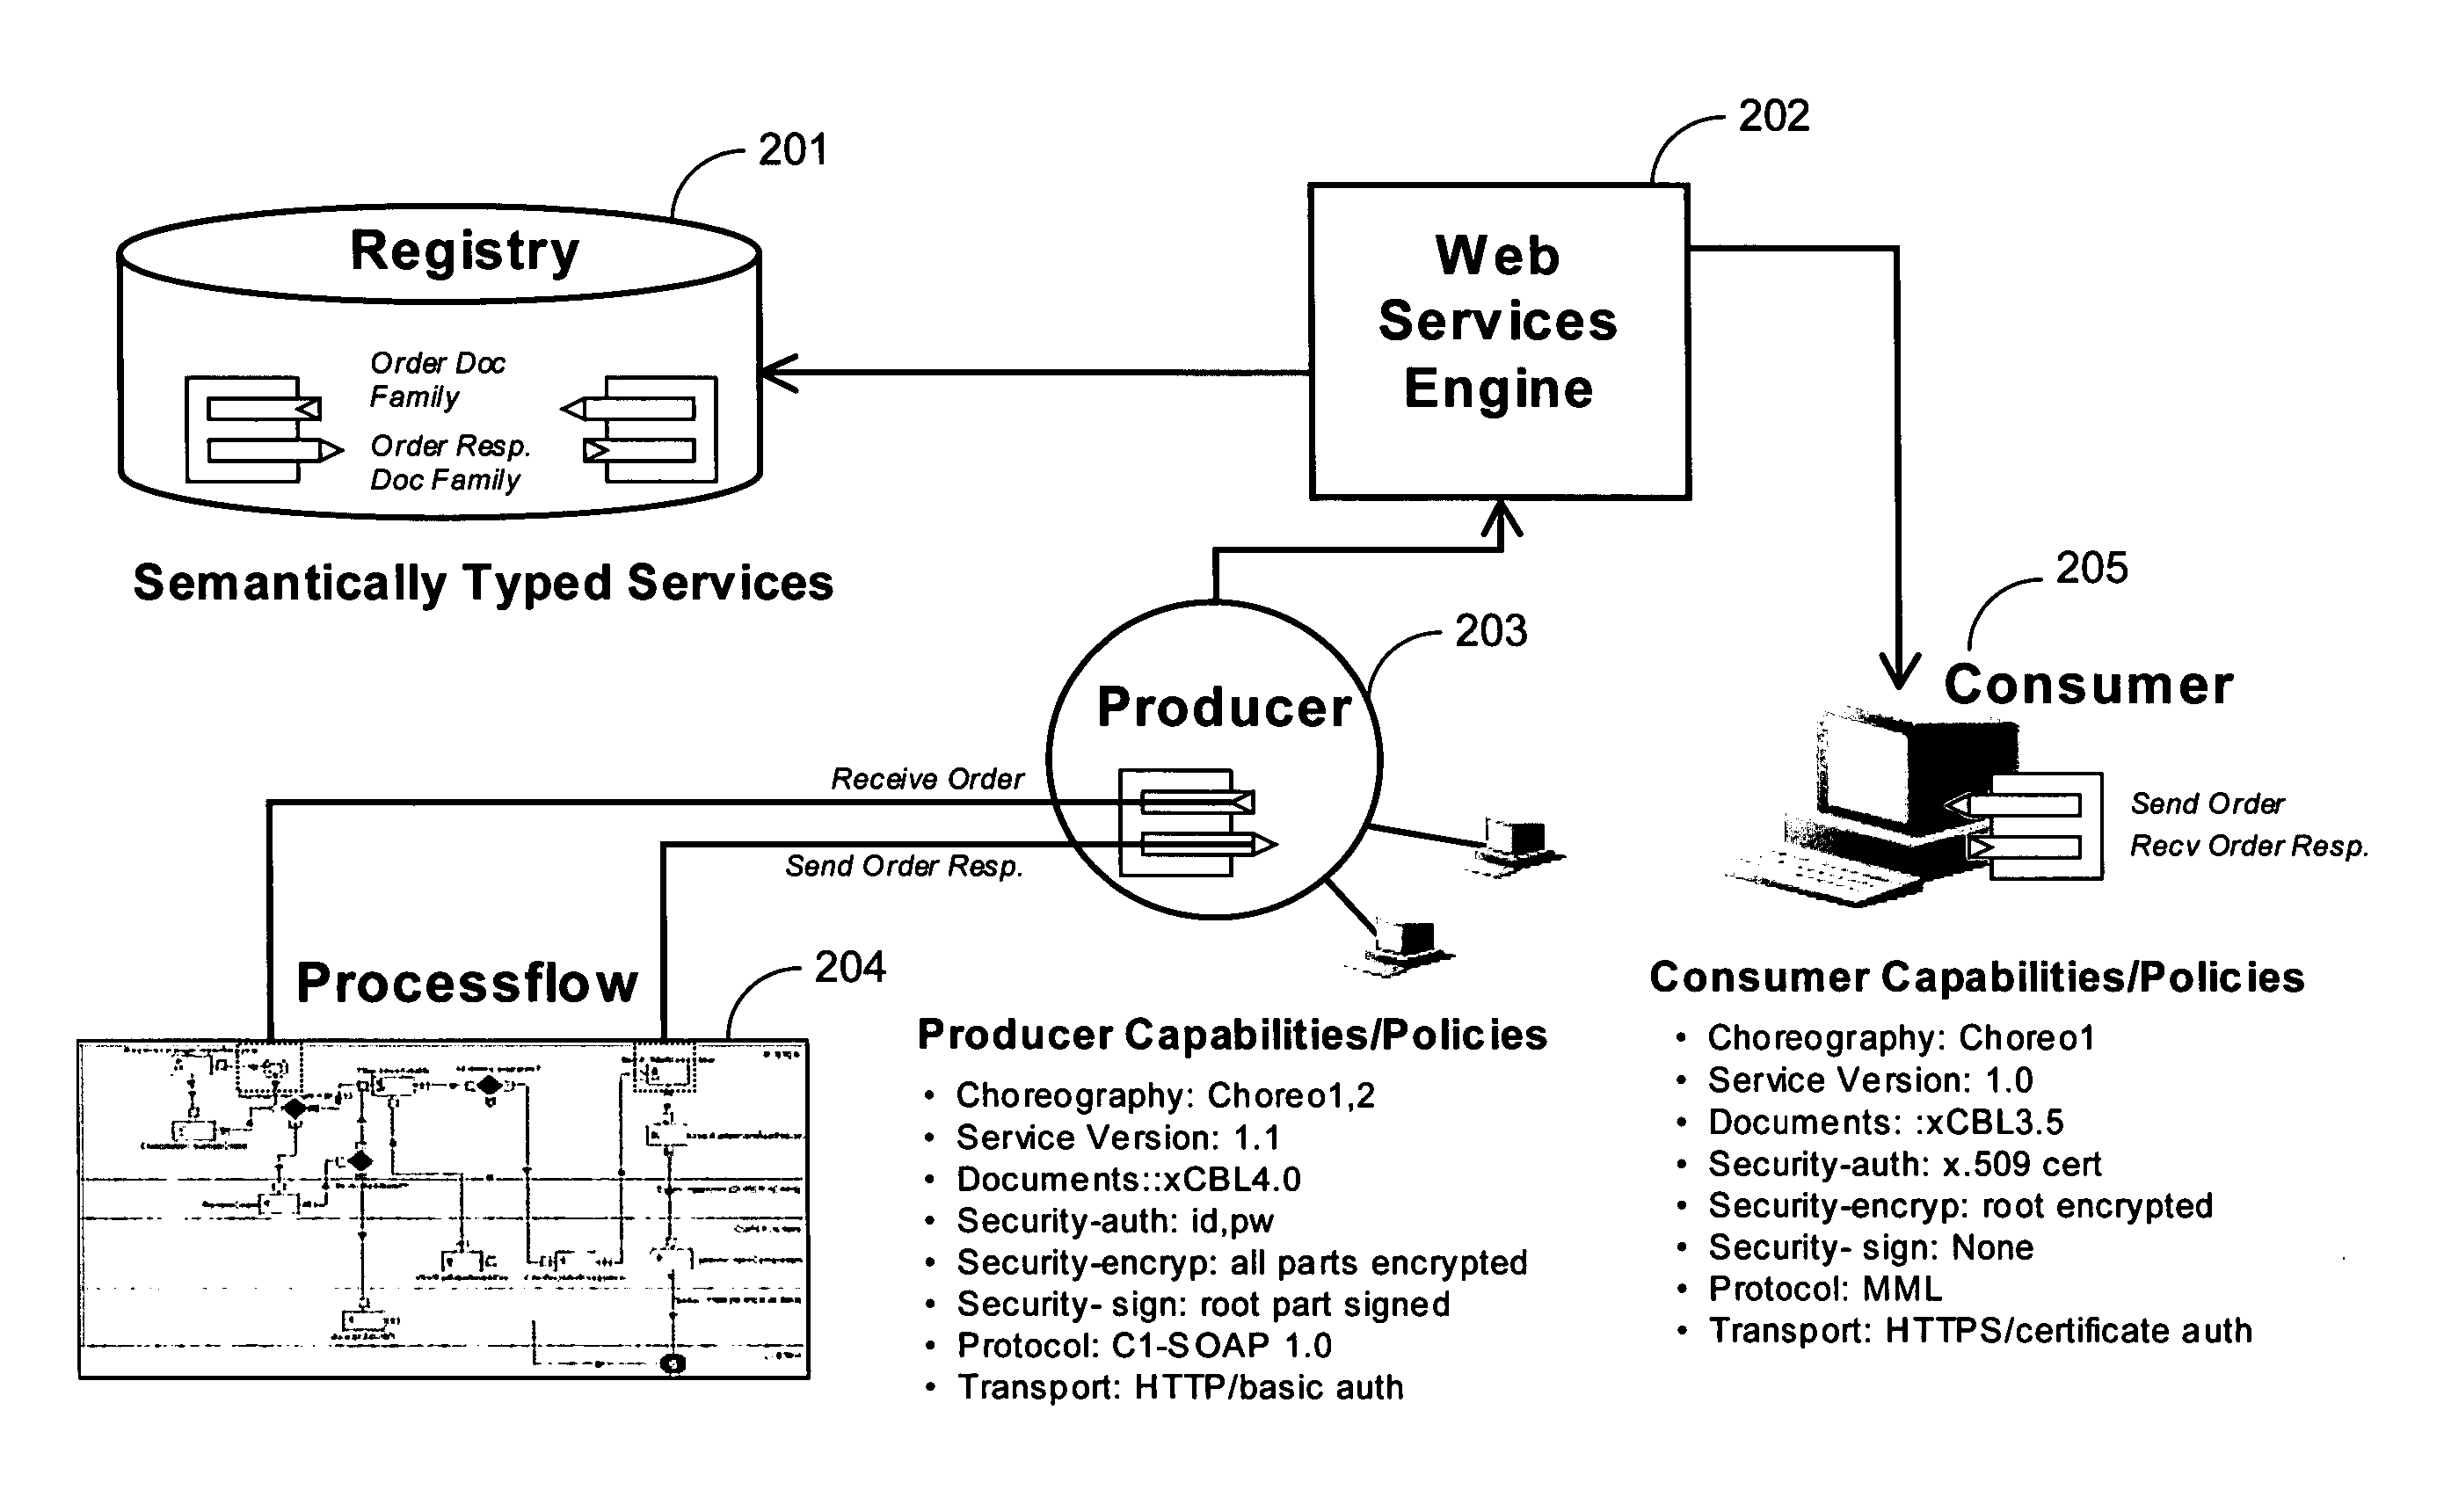 Dynamic interoperability contract for web services